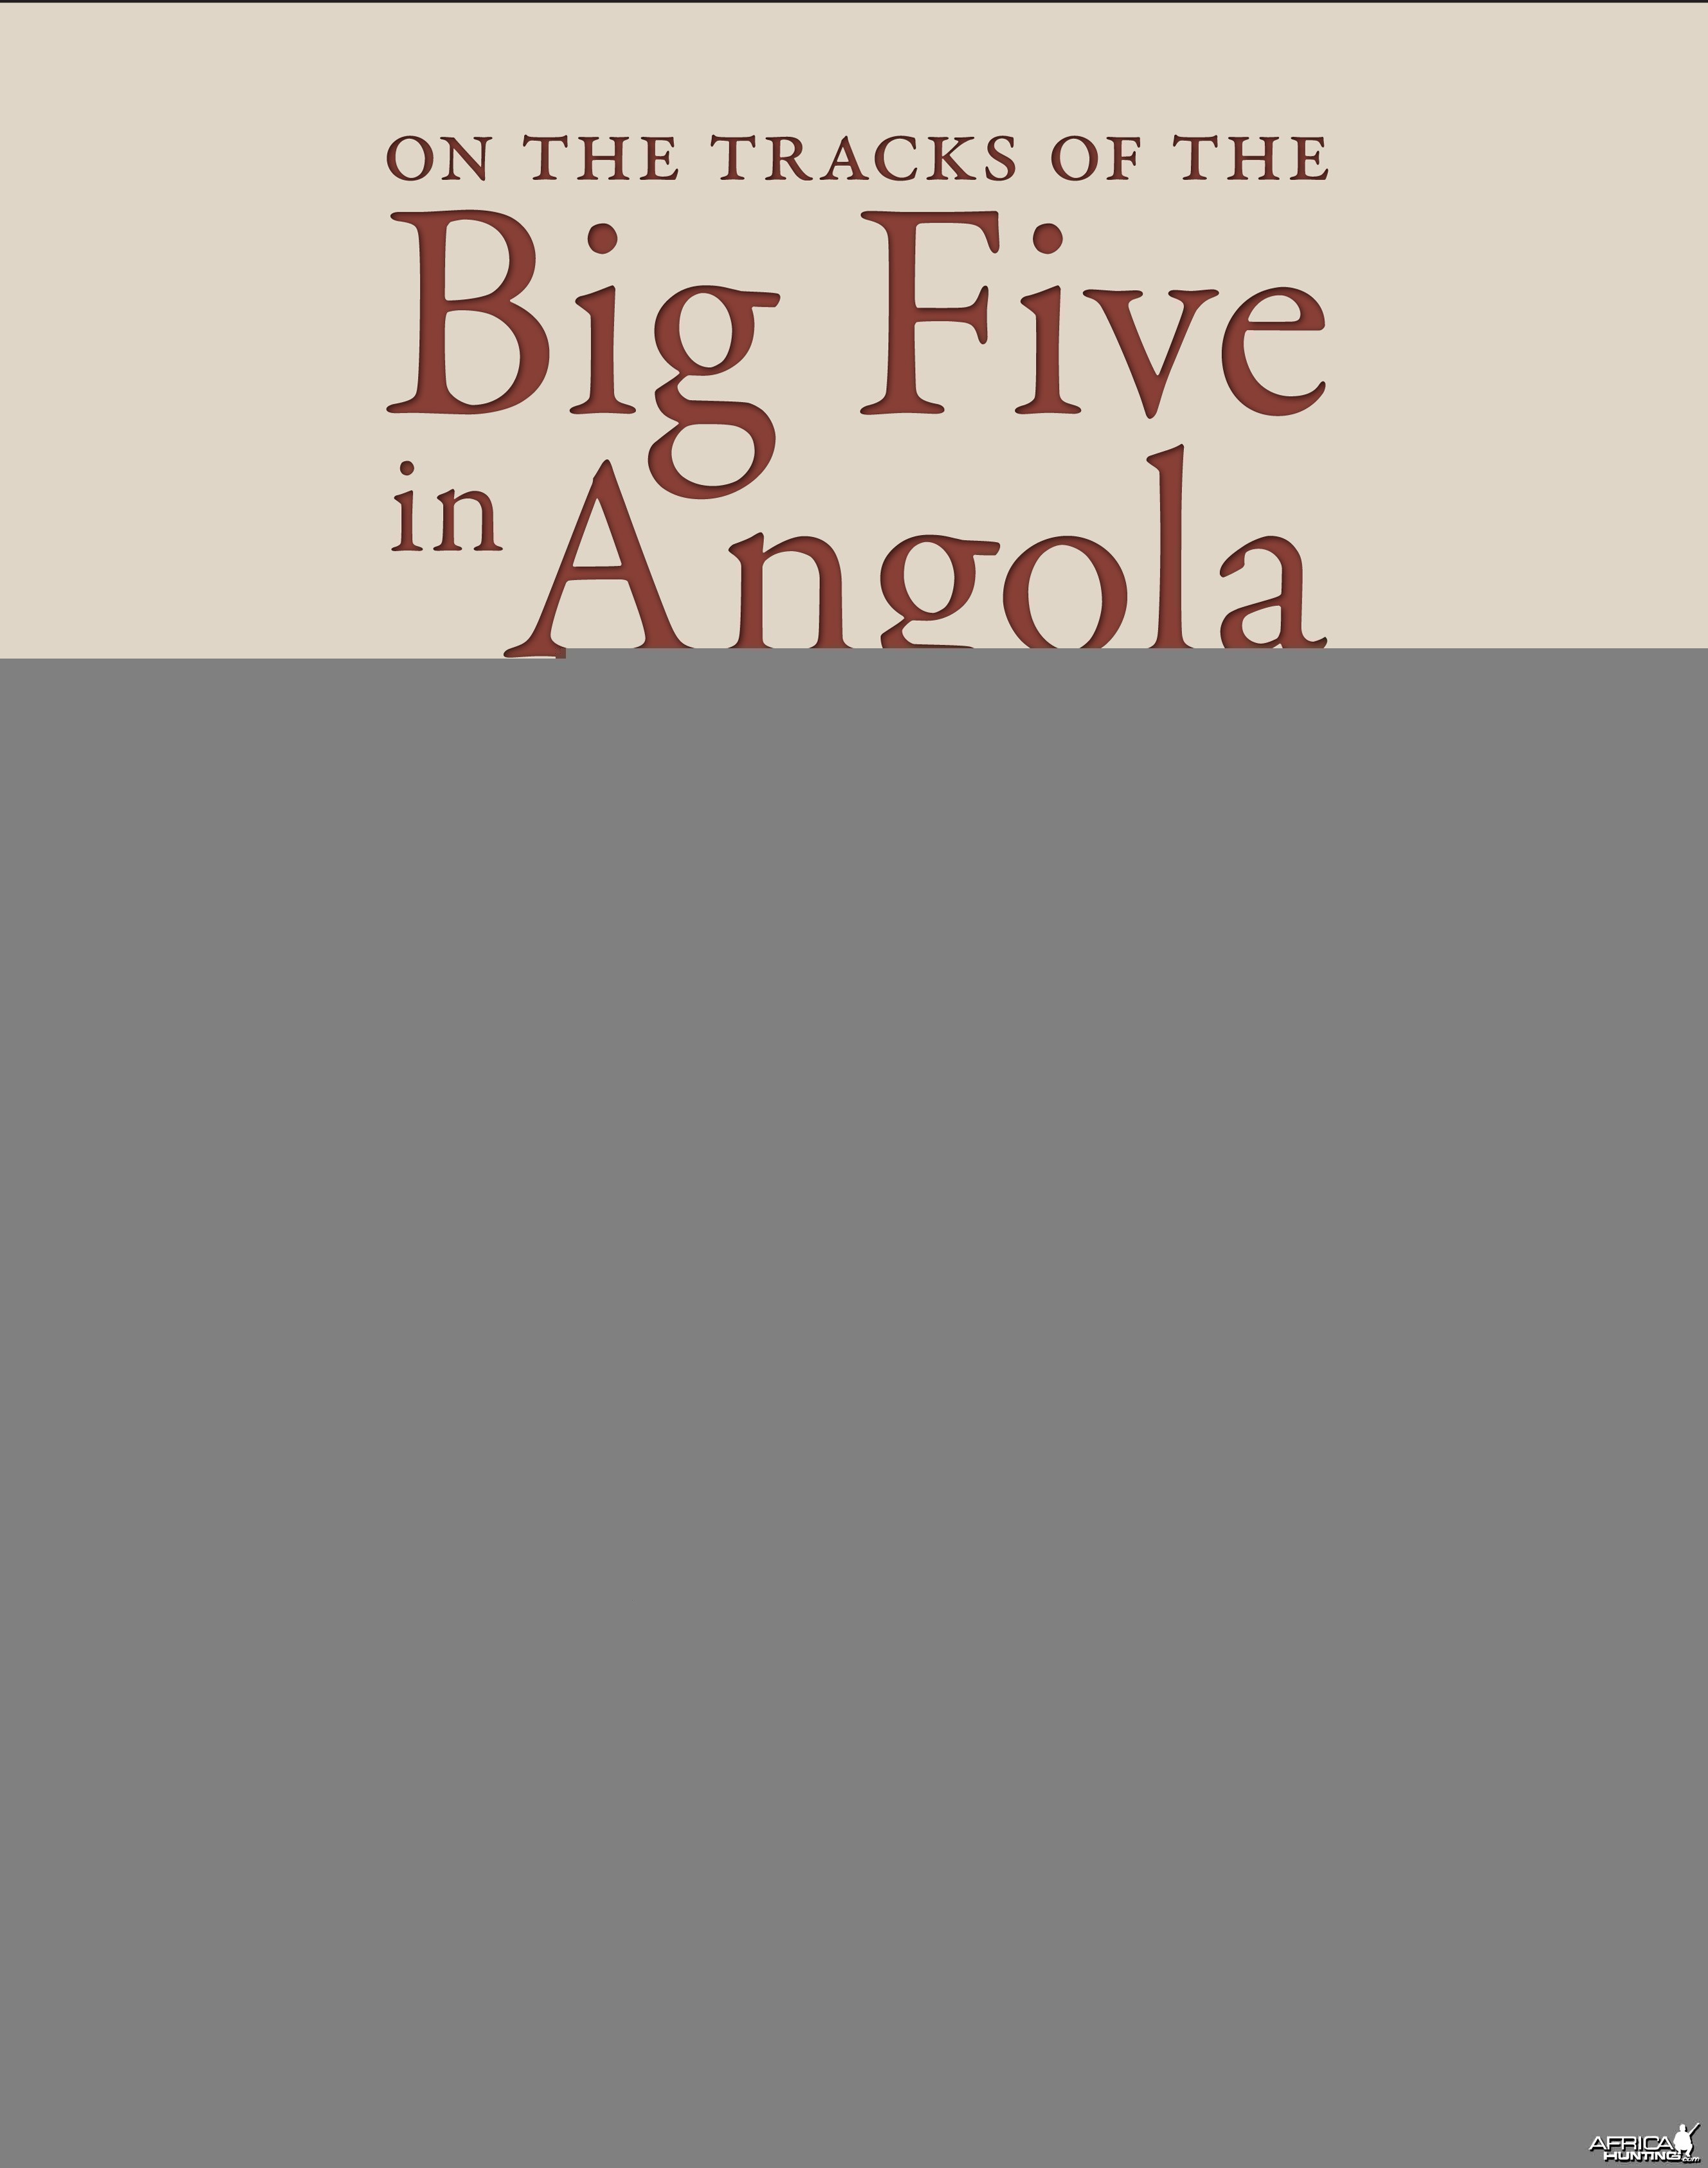 On the Tracks of the Big Five in Angola